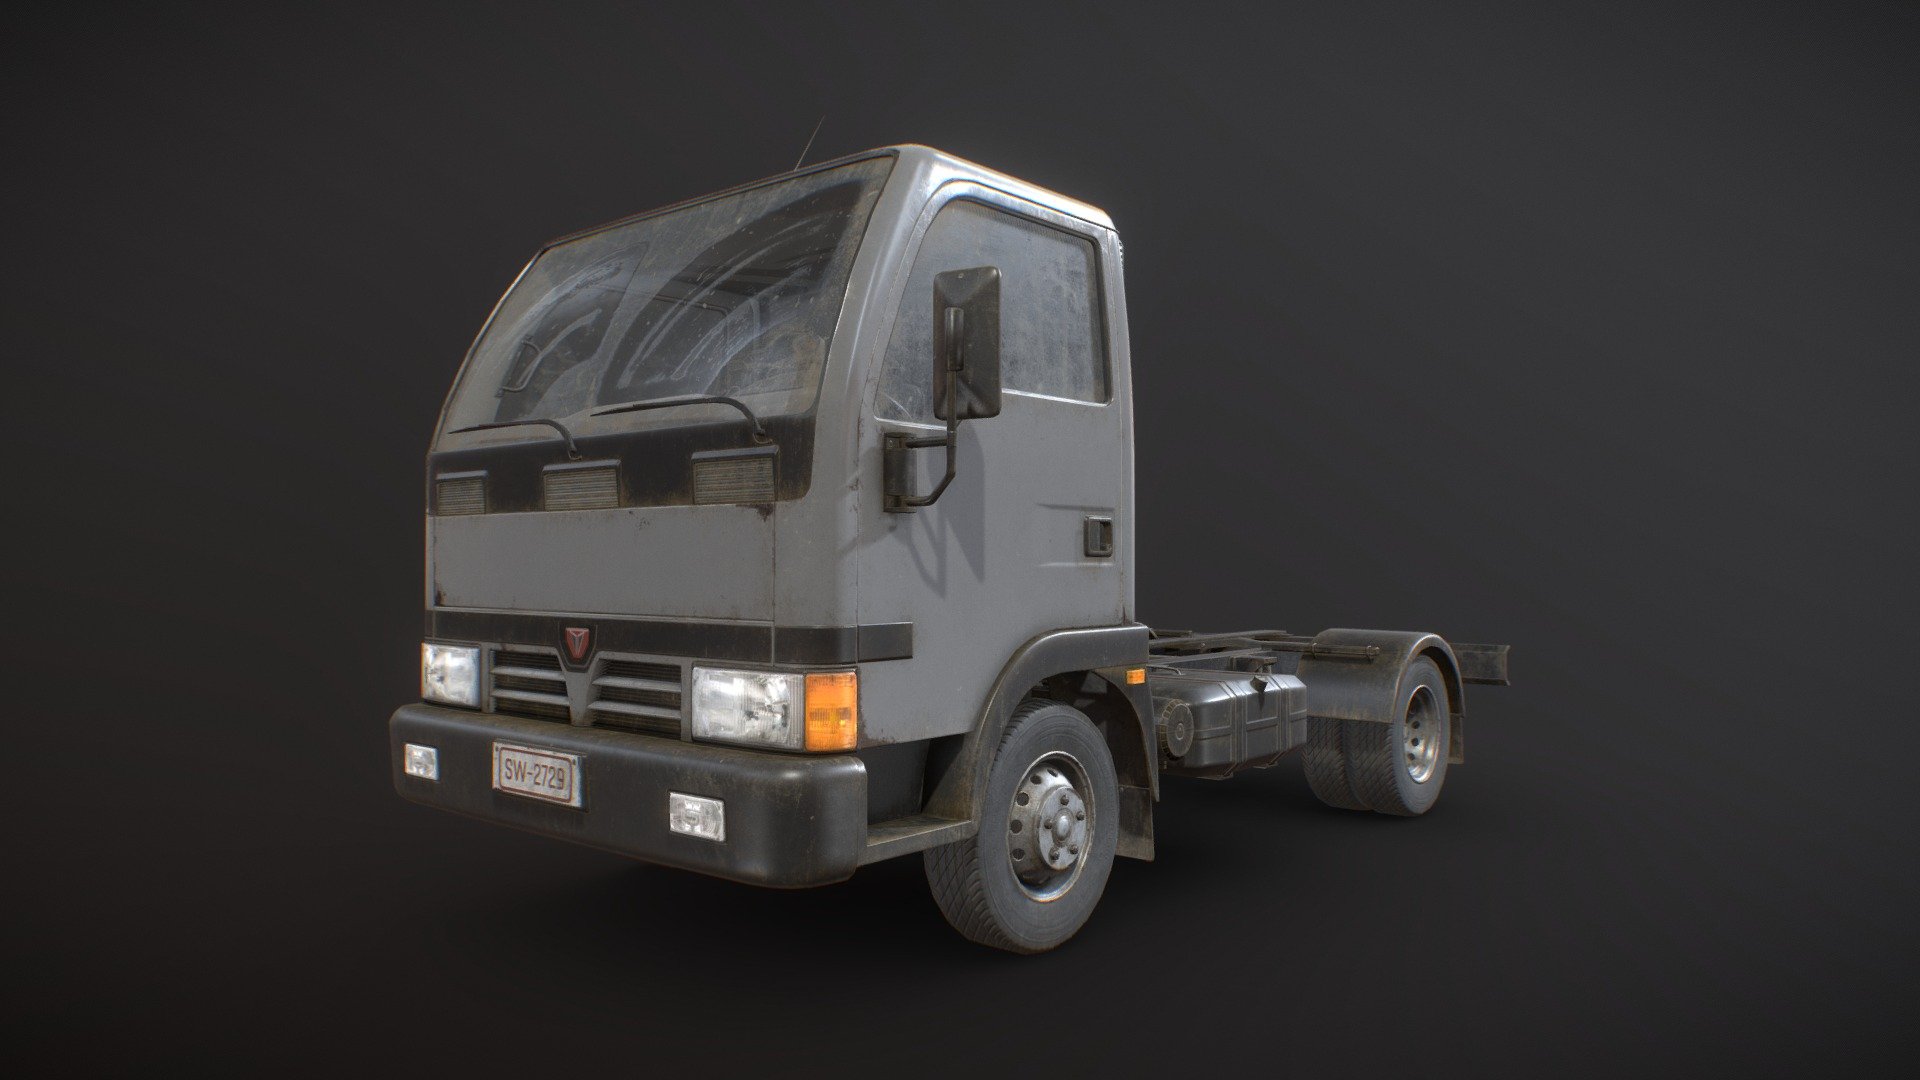 3D model of a generic Light Truck Chassis with PBR textures (2 sets included: clean and weathered).

The model is low poly (22.419 Tris), game-ready and has doors and wheels as separated objects ready to animate (not animated):




Real-world scale and centered

UnwrapUVW included

The unit of measurement used for the model is centimeters

Polys: 11.551 (Converted to triangles: 22.419)

Interior fully modeled and textured.

Doors, wheels, steering wheel can be easily rigged/animated.

Textured in Substance Painter

All branding and labels are custom made.

Maps sizes: 




Chassis: 4096x4096

Interior: 2048x2048

Windows: 1024x1024

Provided Maps (cleand and weathered):




Albedo

Normal

Roughness

Metalness

AO

Opacity included in Albedo (windows)

Emissive (Chassis)

Formats Incuded - MAX / BLEND / OBJ / FBX / 3DS

Other formats available upon request.

This model can be used for any game, film, personal project, etc. You may not resell or redistribute any content - Light Truck Chassis - Low Poly - Buy Royalty Free 3D model by MSWoodvine 3d model